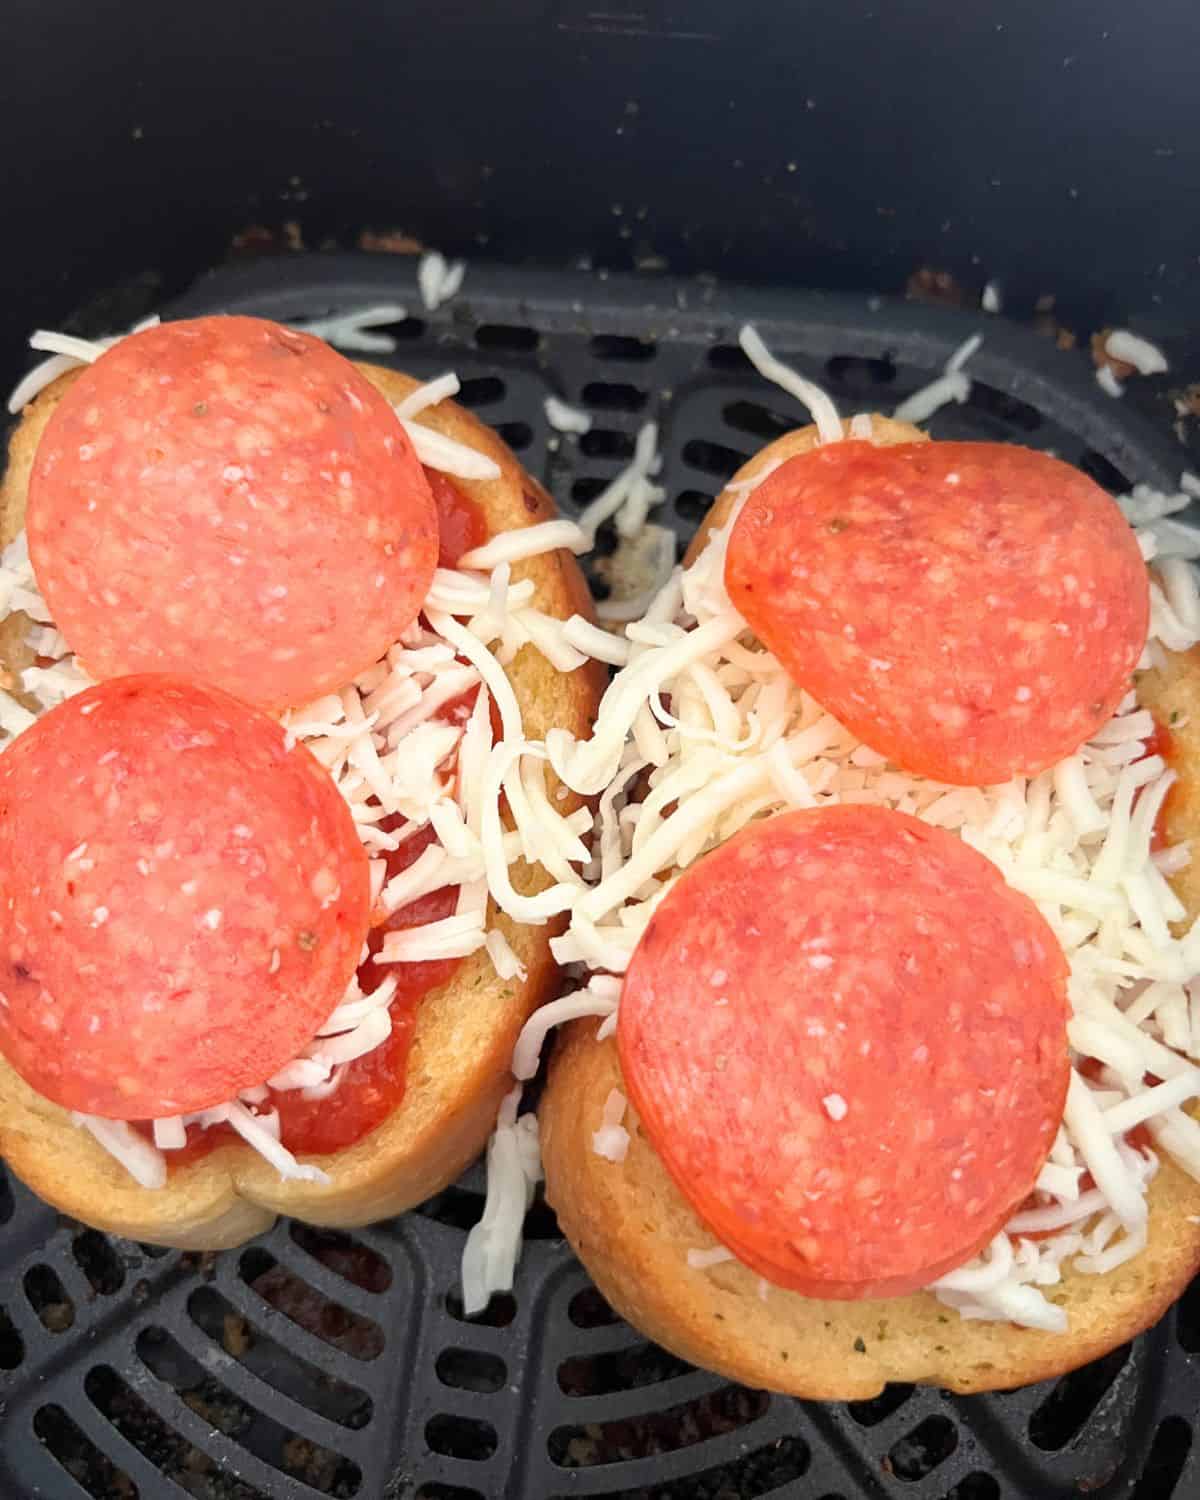 Texas Toast Garlic Bread topped with sauce, cheese, and pepperoni. 